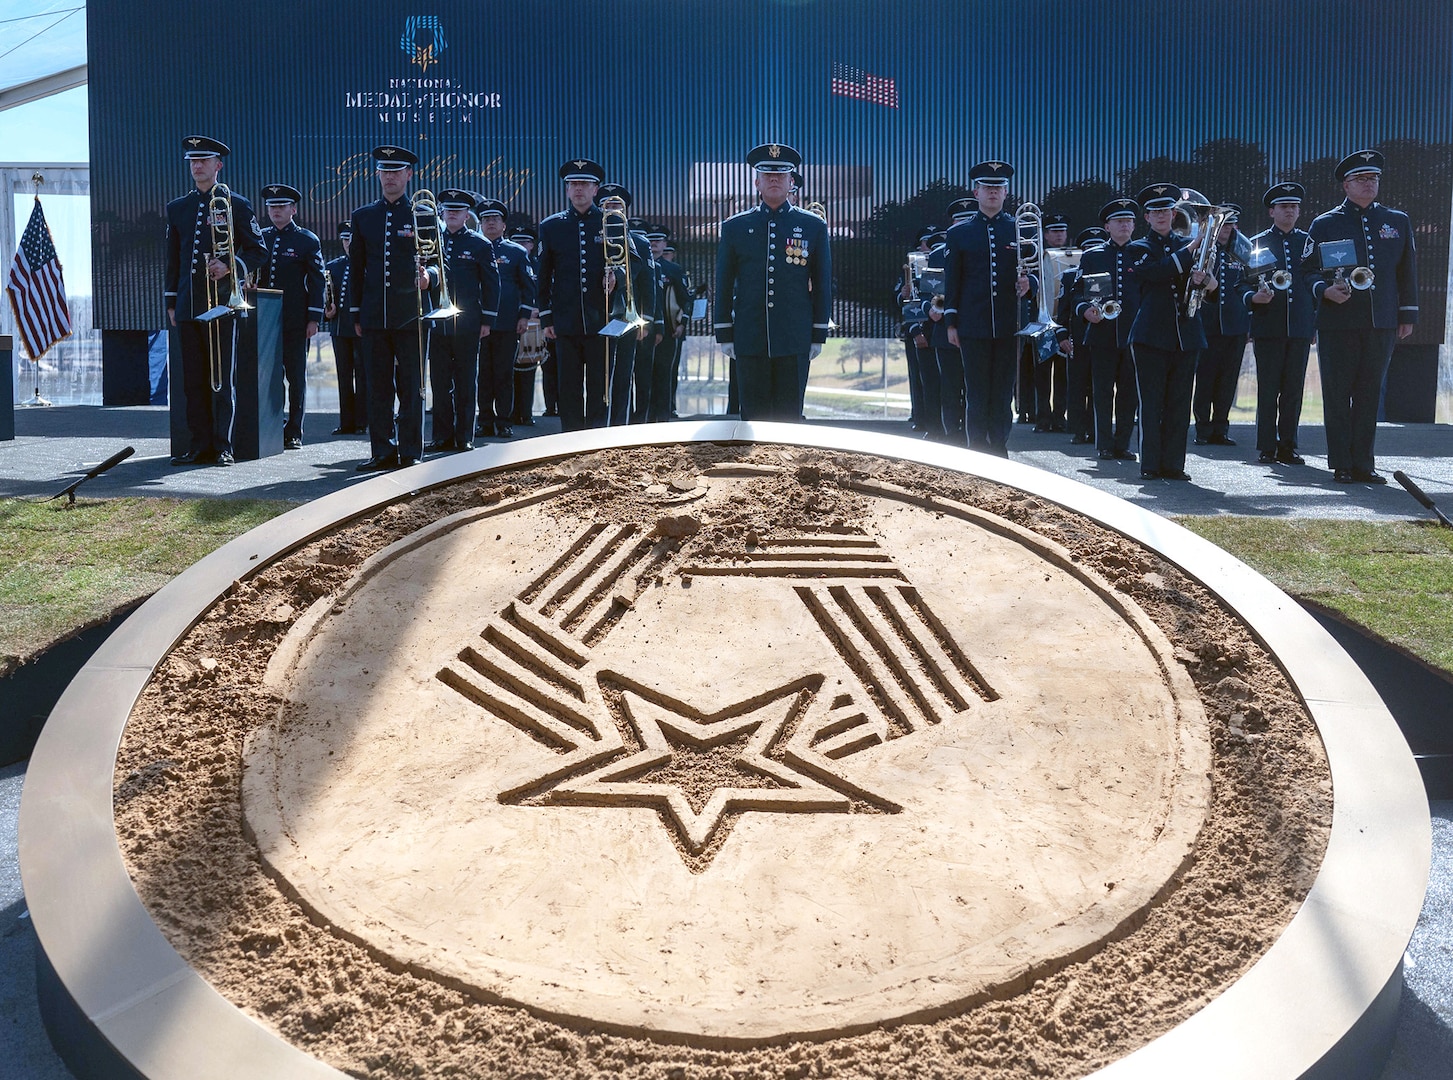 The U.S. Air Force Band of the West performs the Air Force song closing the National Medal of Honor Museum ceremony, March 25, 2022 at Arlington, Texas.